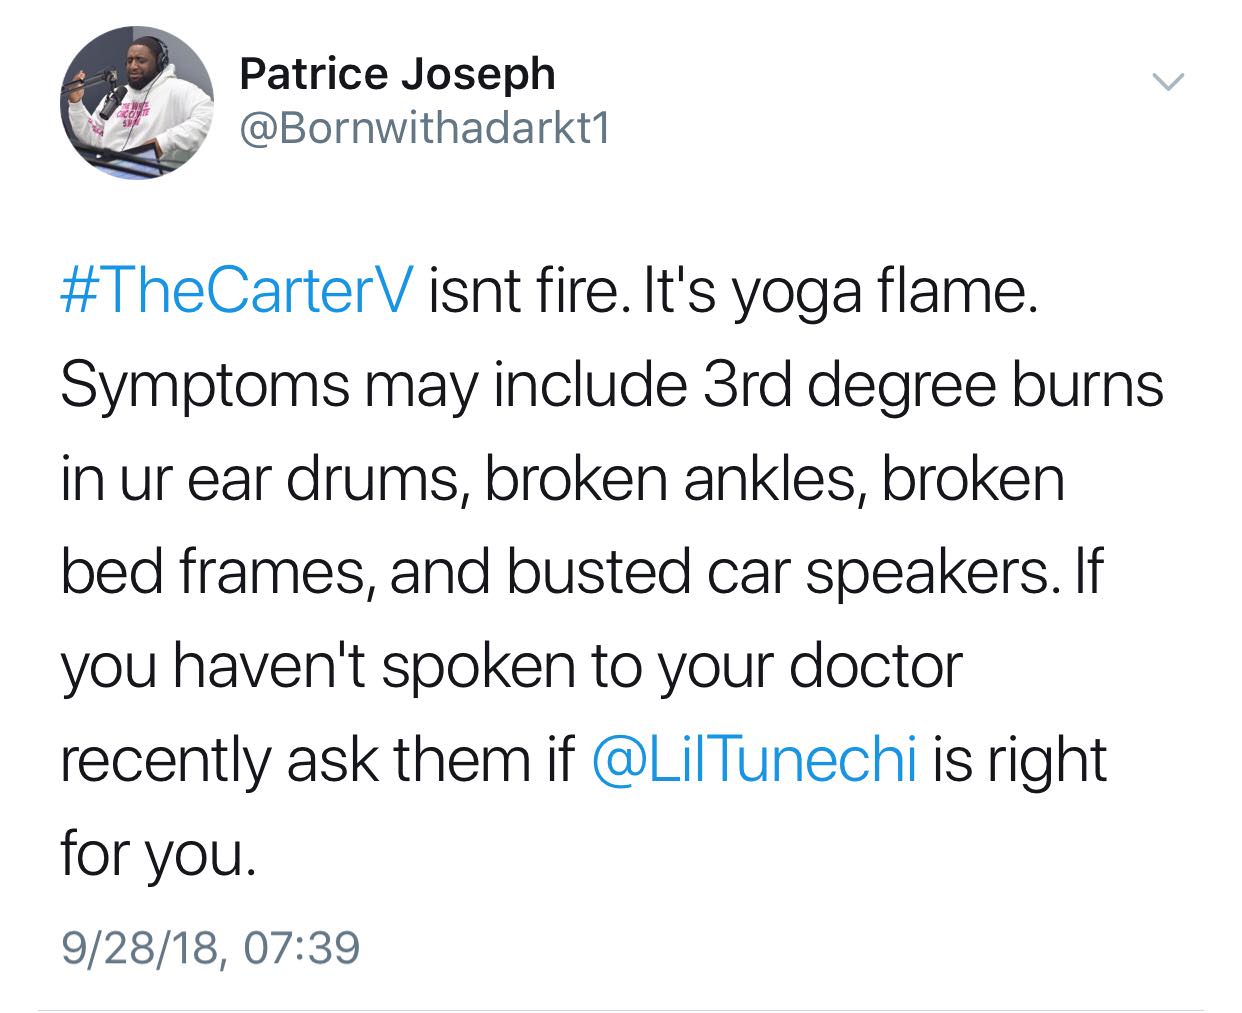 black twitter Patrice Joseph Com Spa V isnt fire. It's yoga flame. Symptoms may include 3rd degree burns in ur ear drums, broken ankles, broken bed frames, and busted car speakers. If you haven't spoken to your doctor recently ask them if is right for you